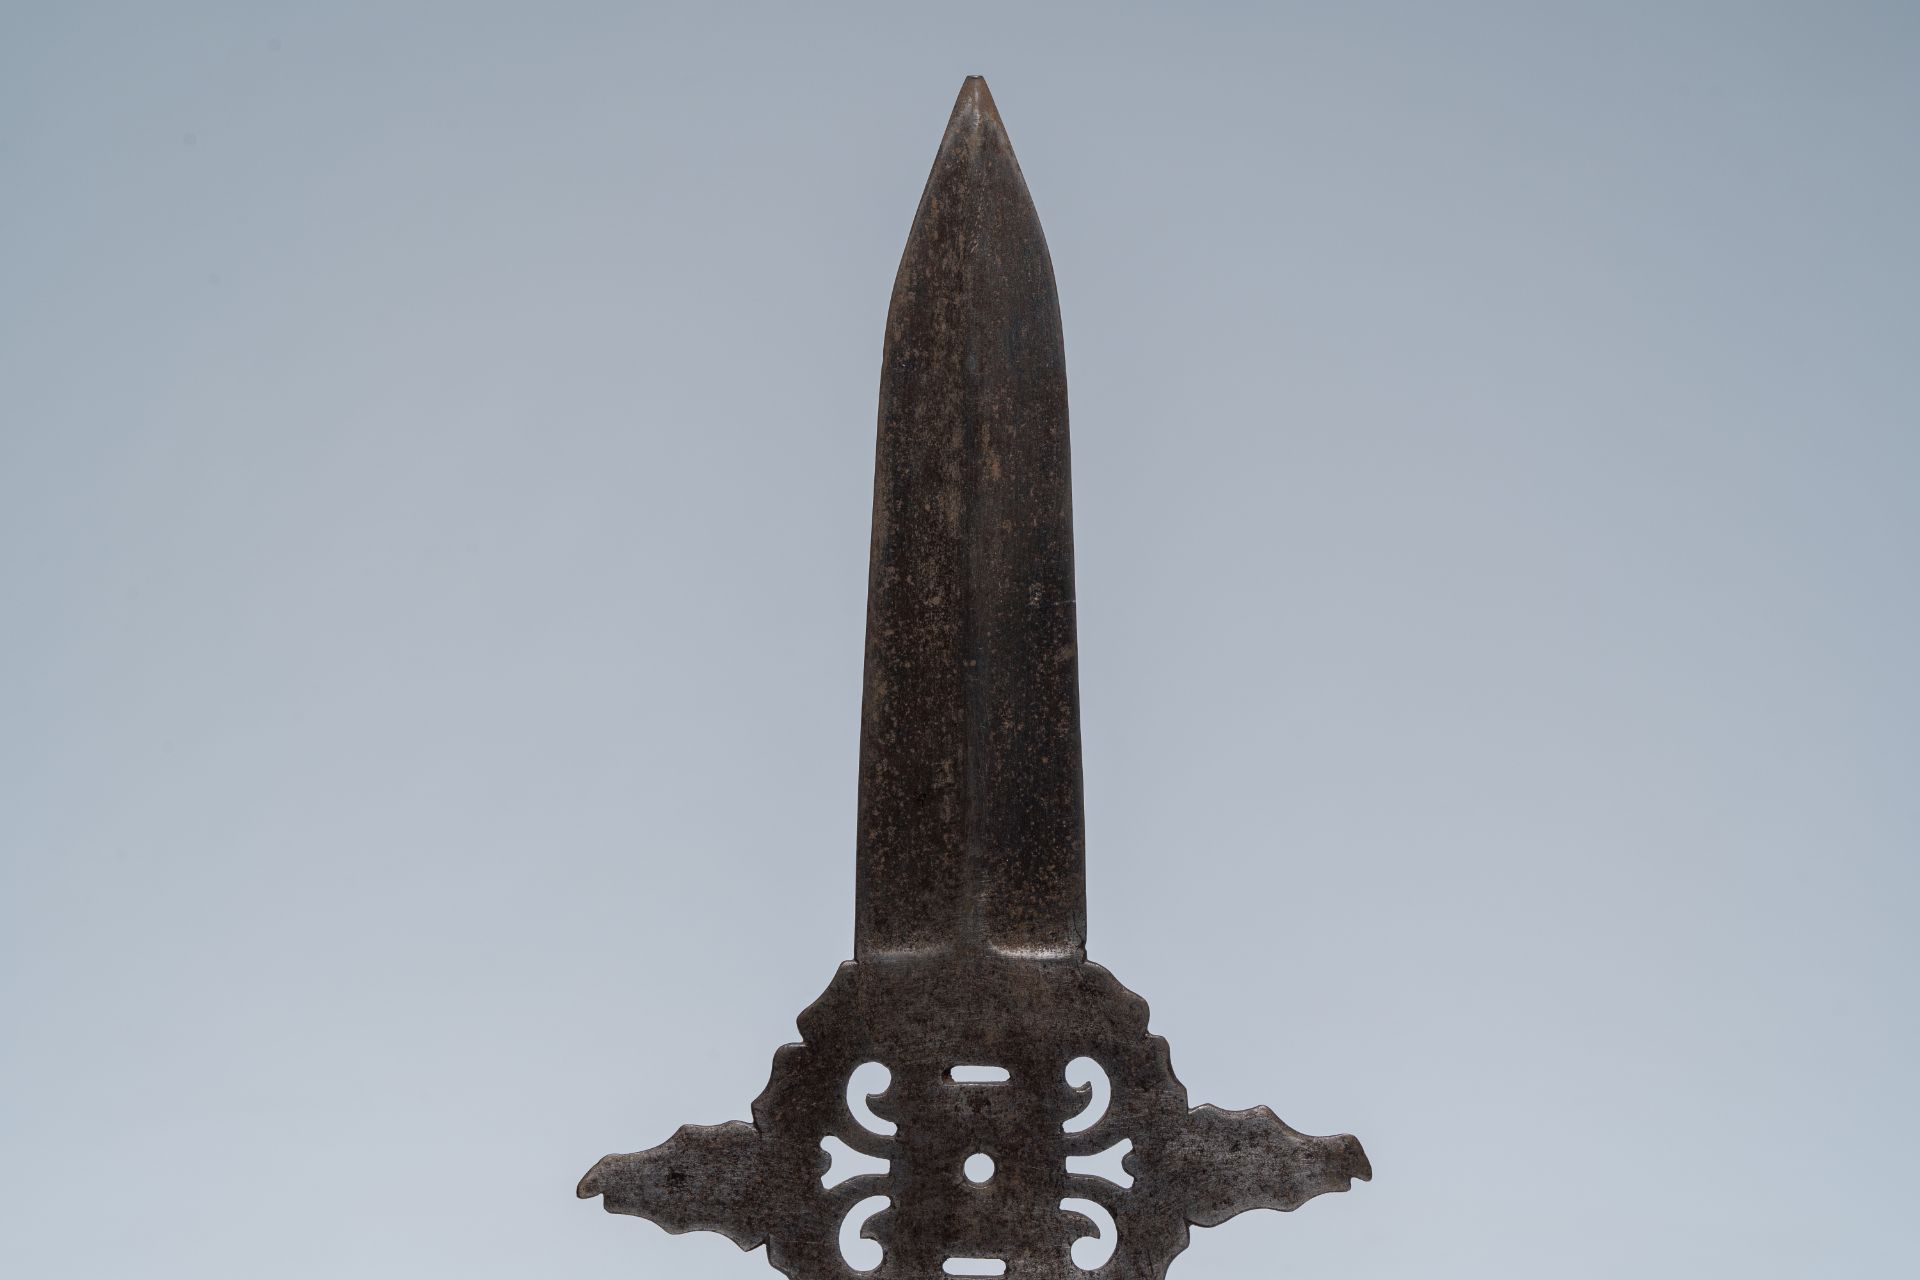 An open worked wrought iron spearhead on a wood stand, 19th C. or earlier - Image 8 of 8